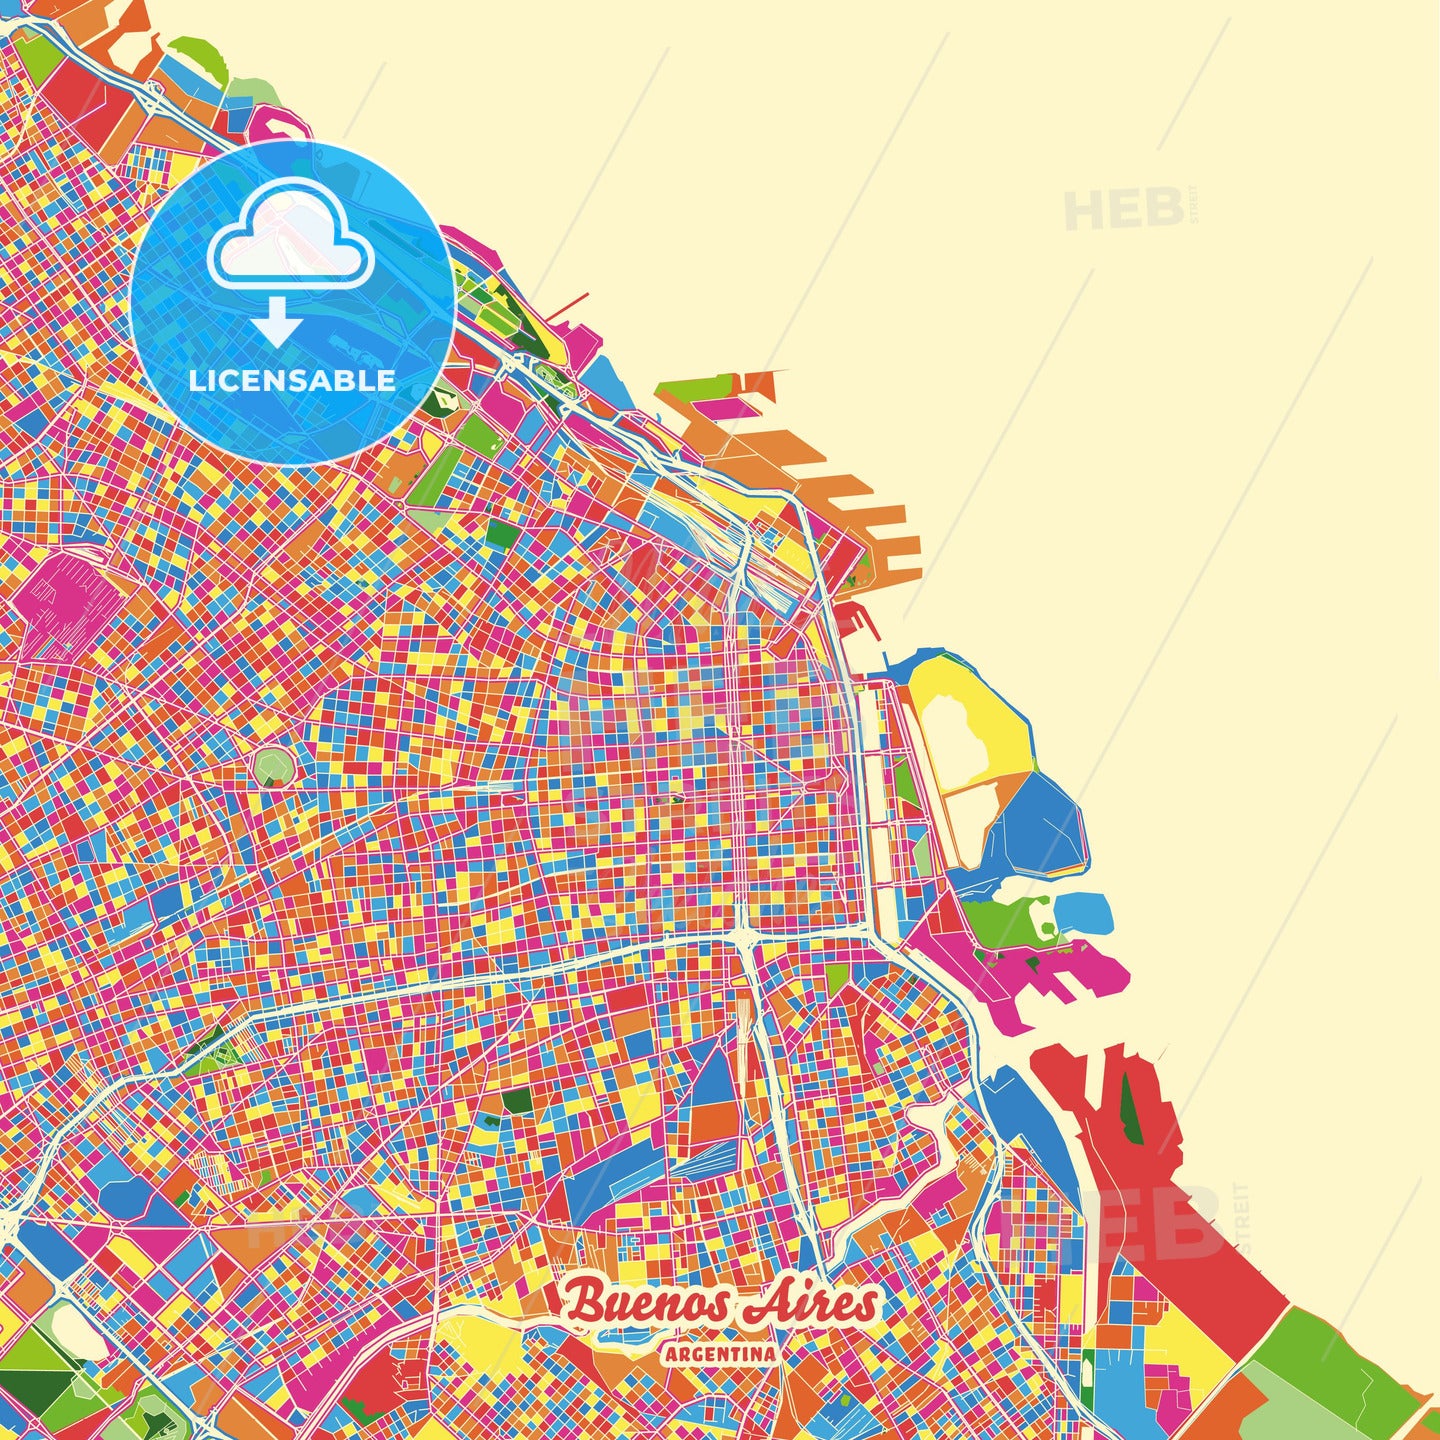 Buenos Aires, Argentina Crazy Colorful Street Map Poster Template - HEBSTREITS Sketches